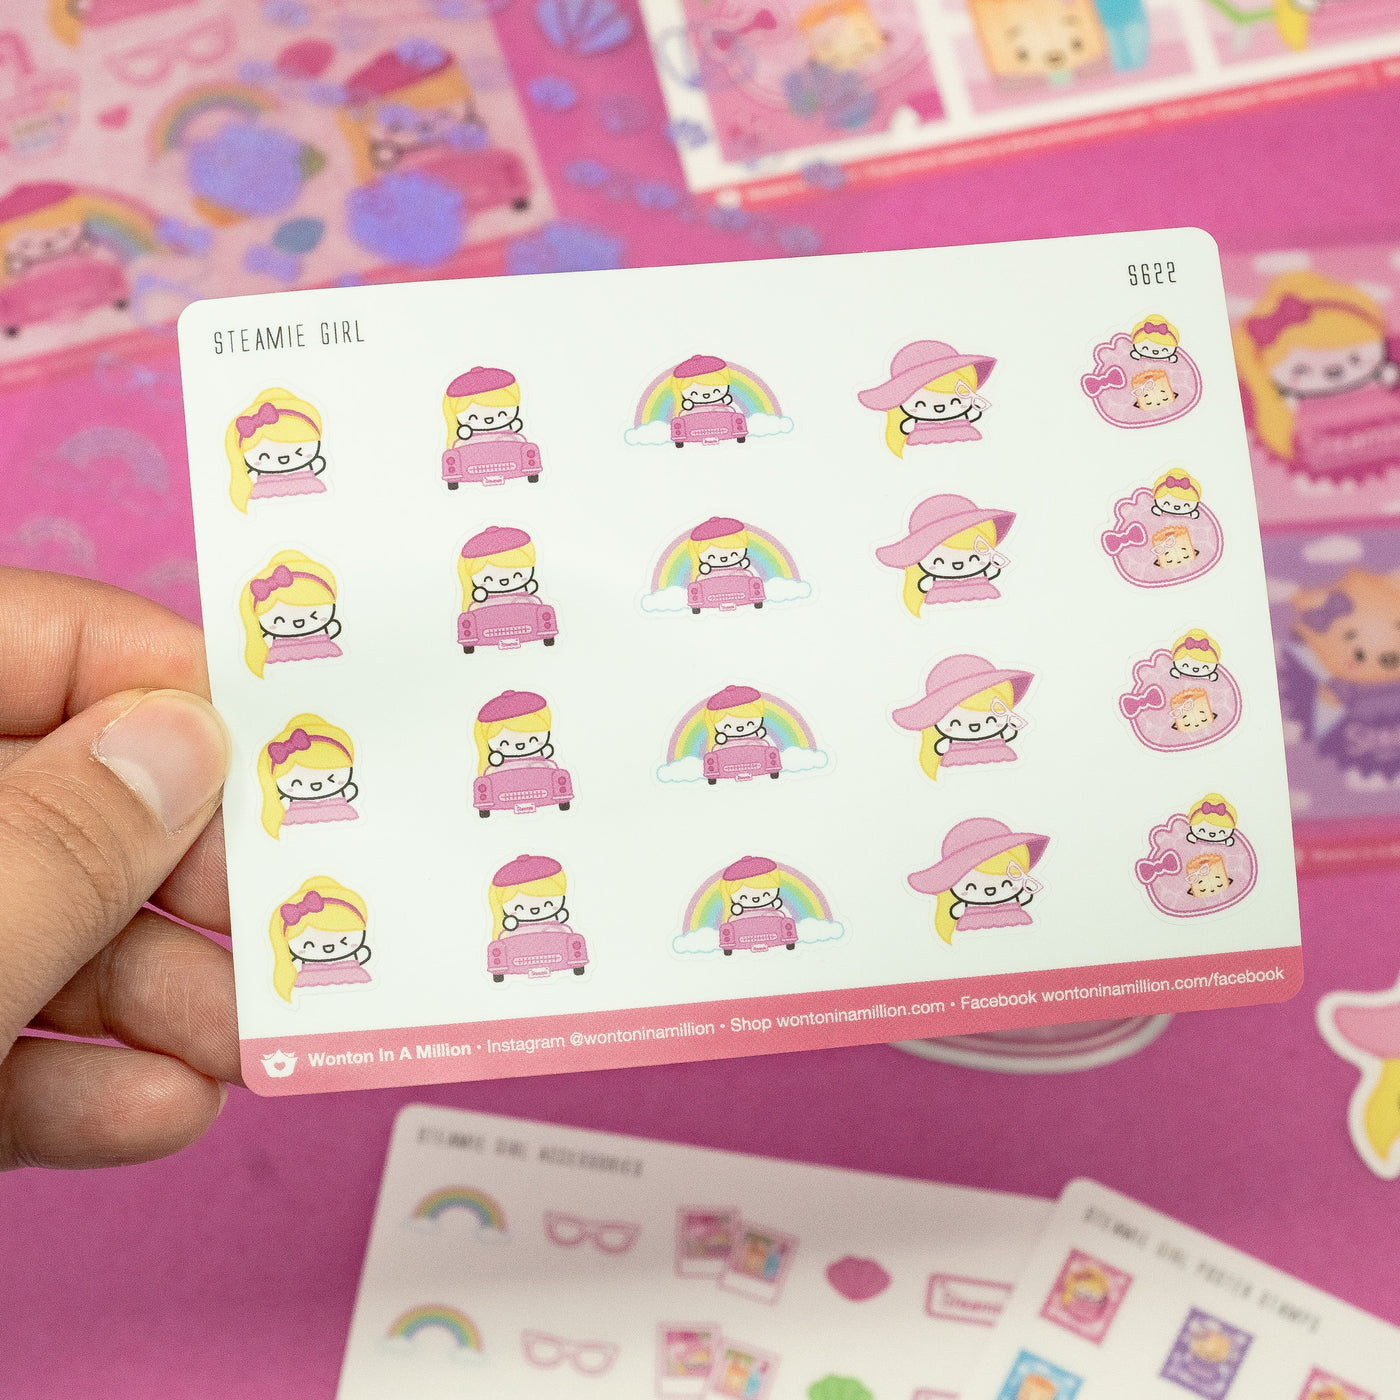 Steamie Girl Stickers